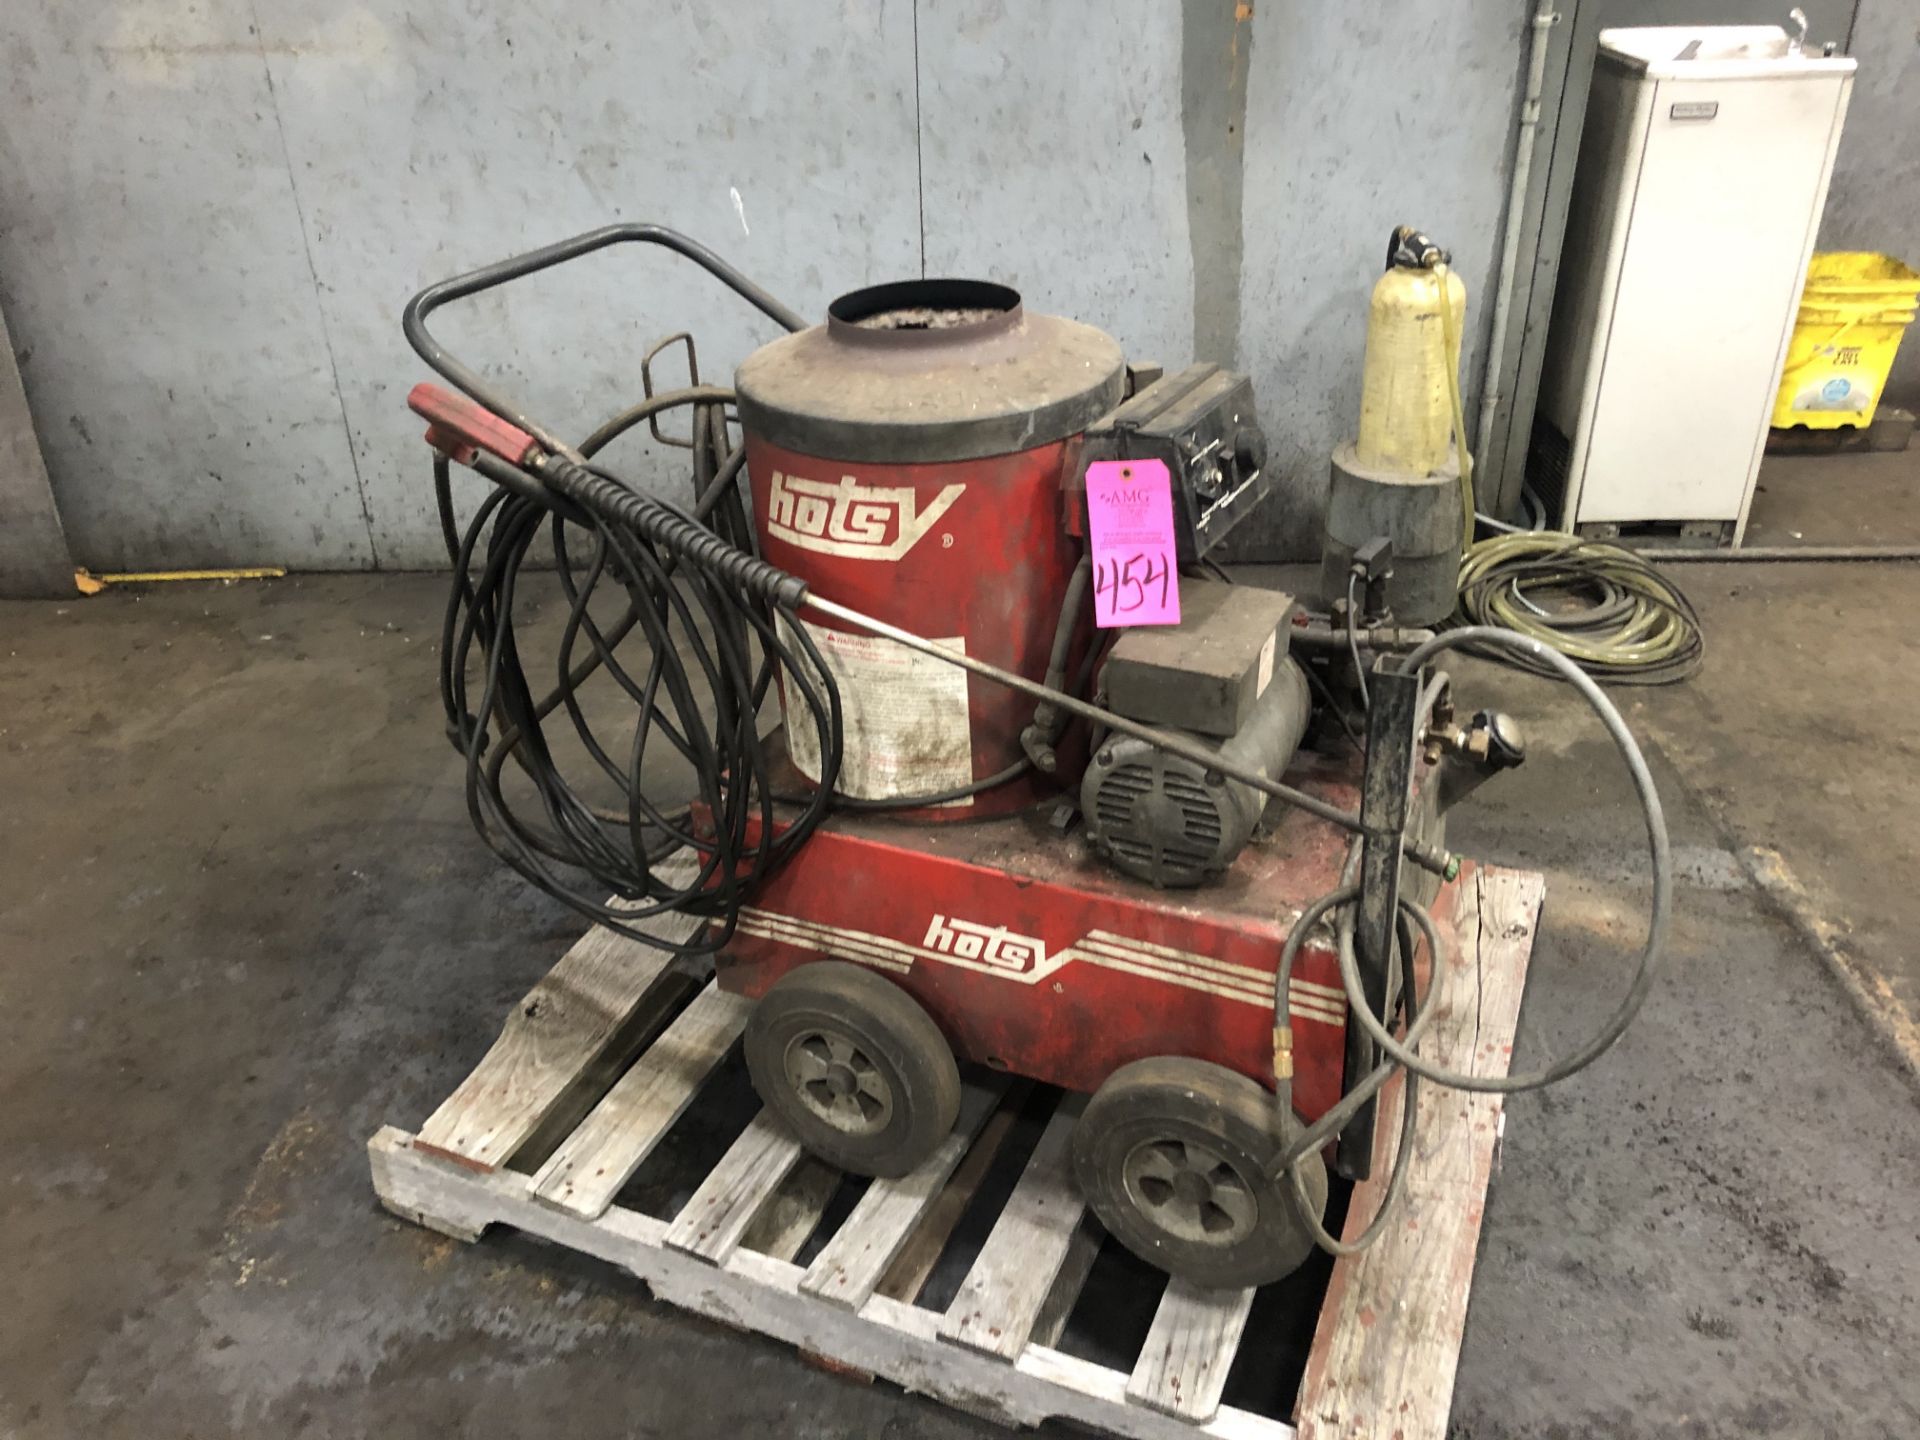 Hotsy Industrial Power Washer Model-555,1300PSI, 2HP, 20AMP